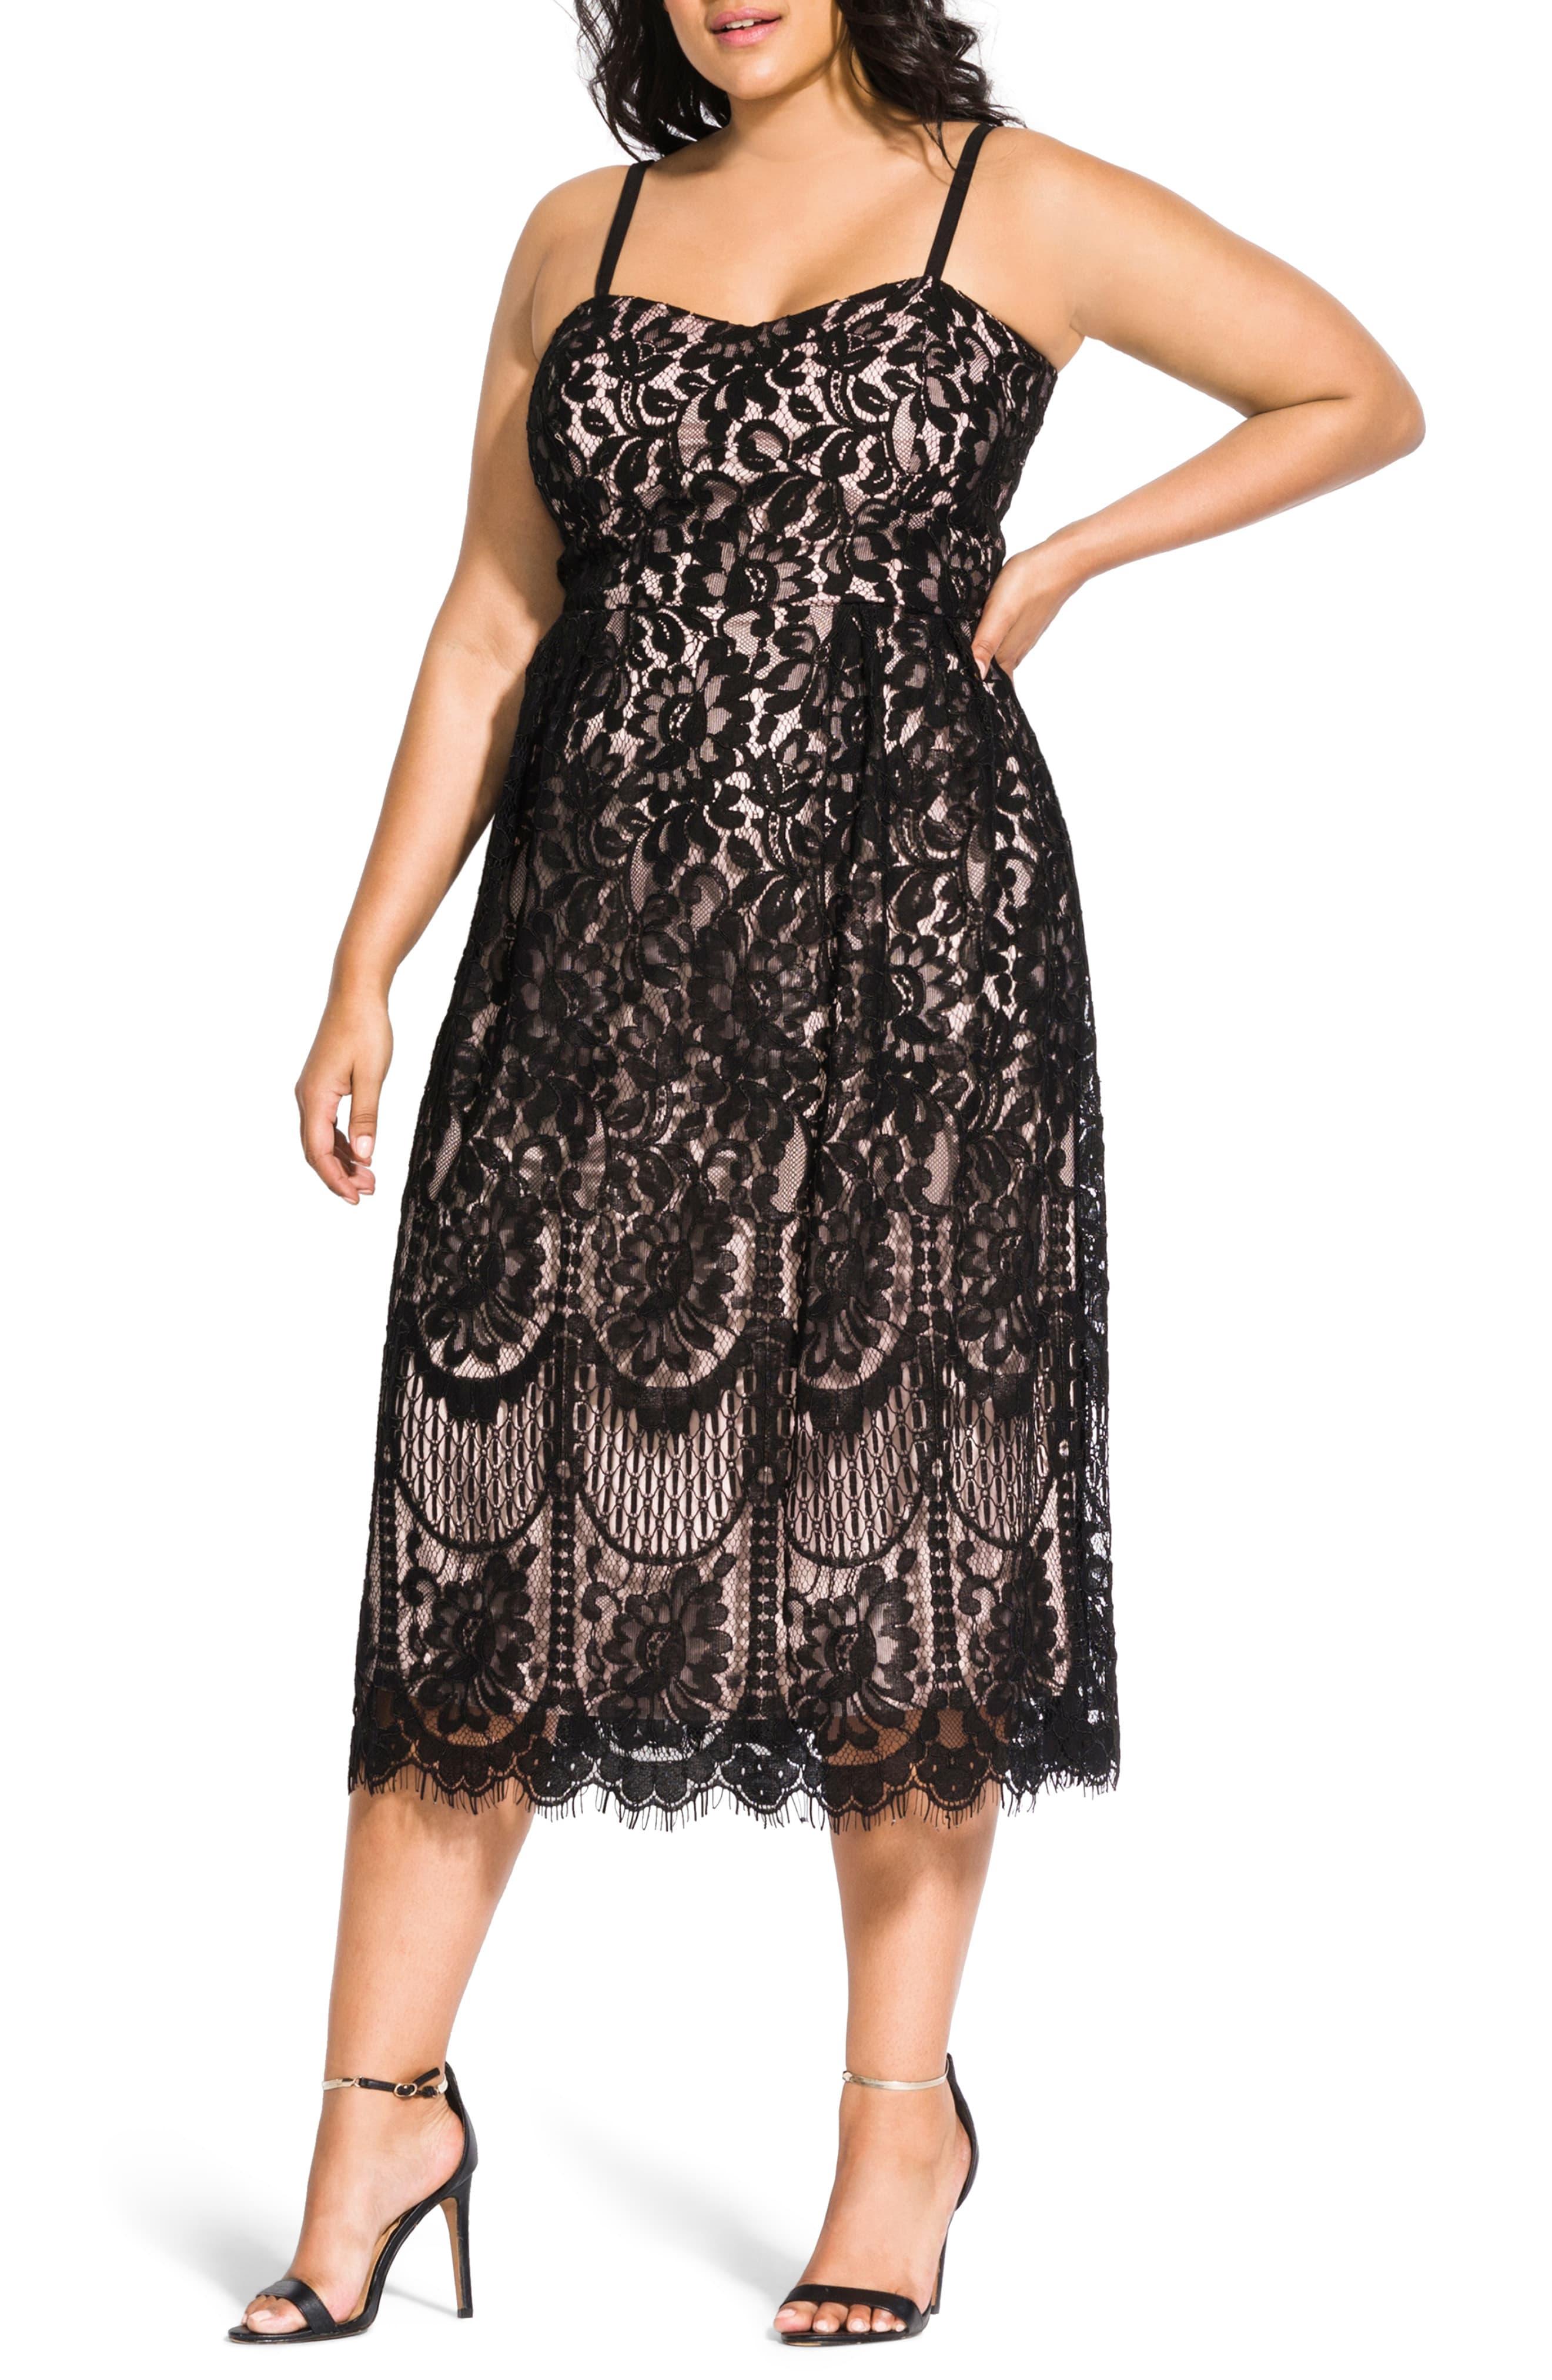 City Chic Sweet Darling Lace Cocktail Dress in Black - Lyst